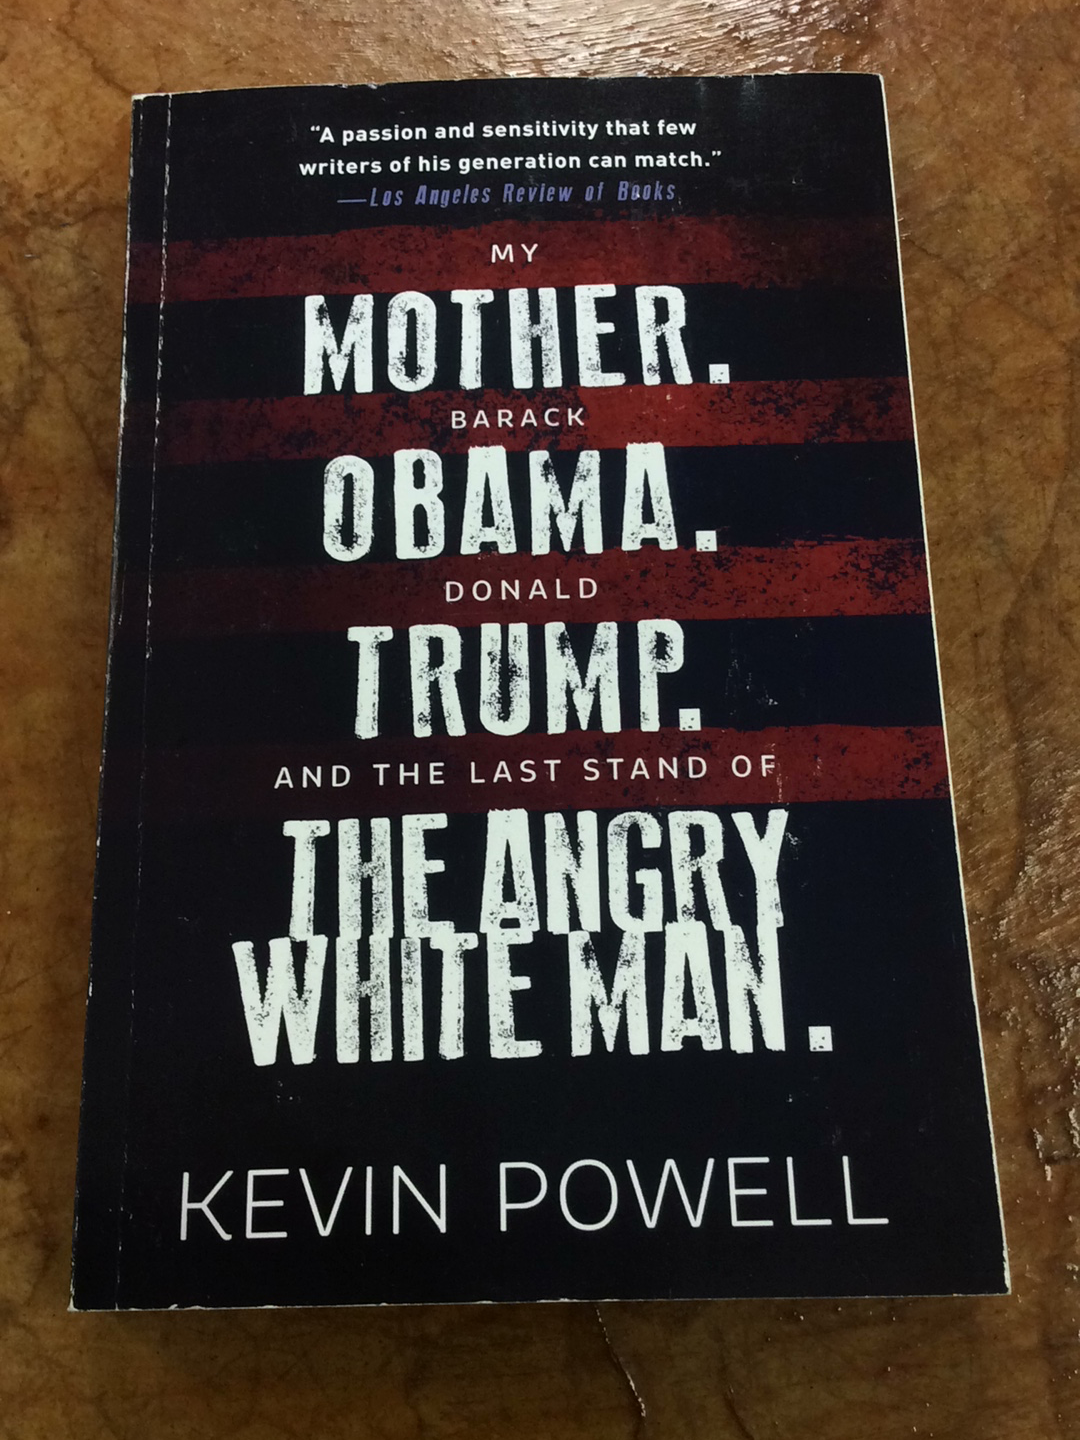 My Mother. Barack Obama. Donald Trump. And the Last Angry White Man.